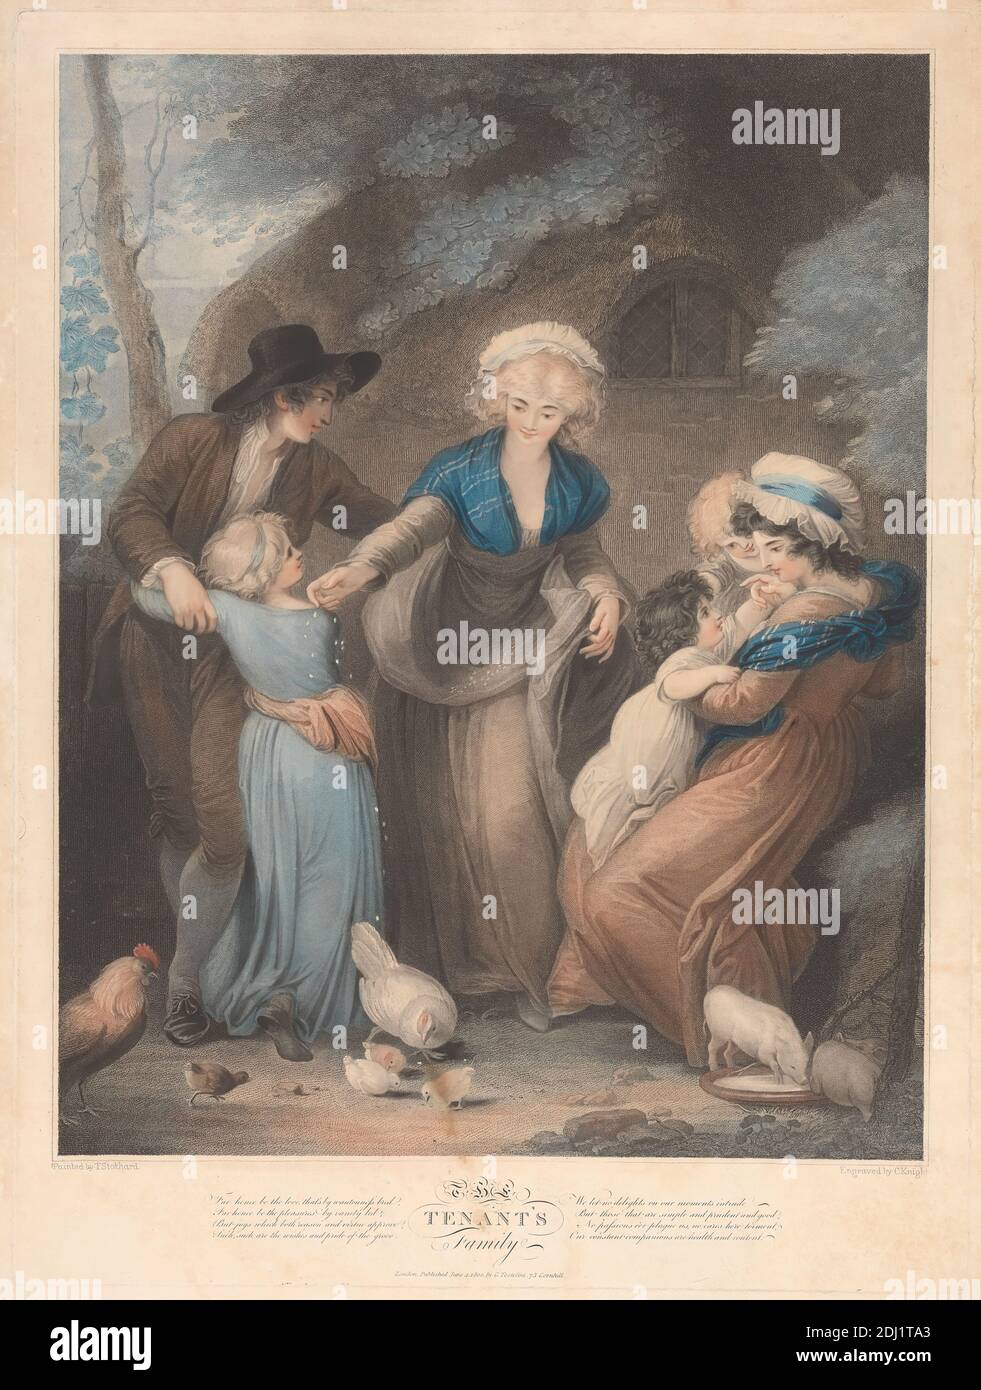 Tenant's Family, Charles Knight, 1743–c.1826, British, after Thomas Stothard, 1755–1834, British, 1800, Colored stipple engraving, Sheet: 21 x 16 1/2in. (53.3 x 41.9cm Stock Photo